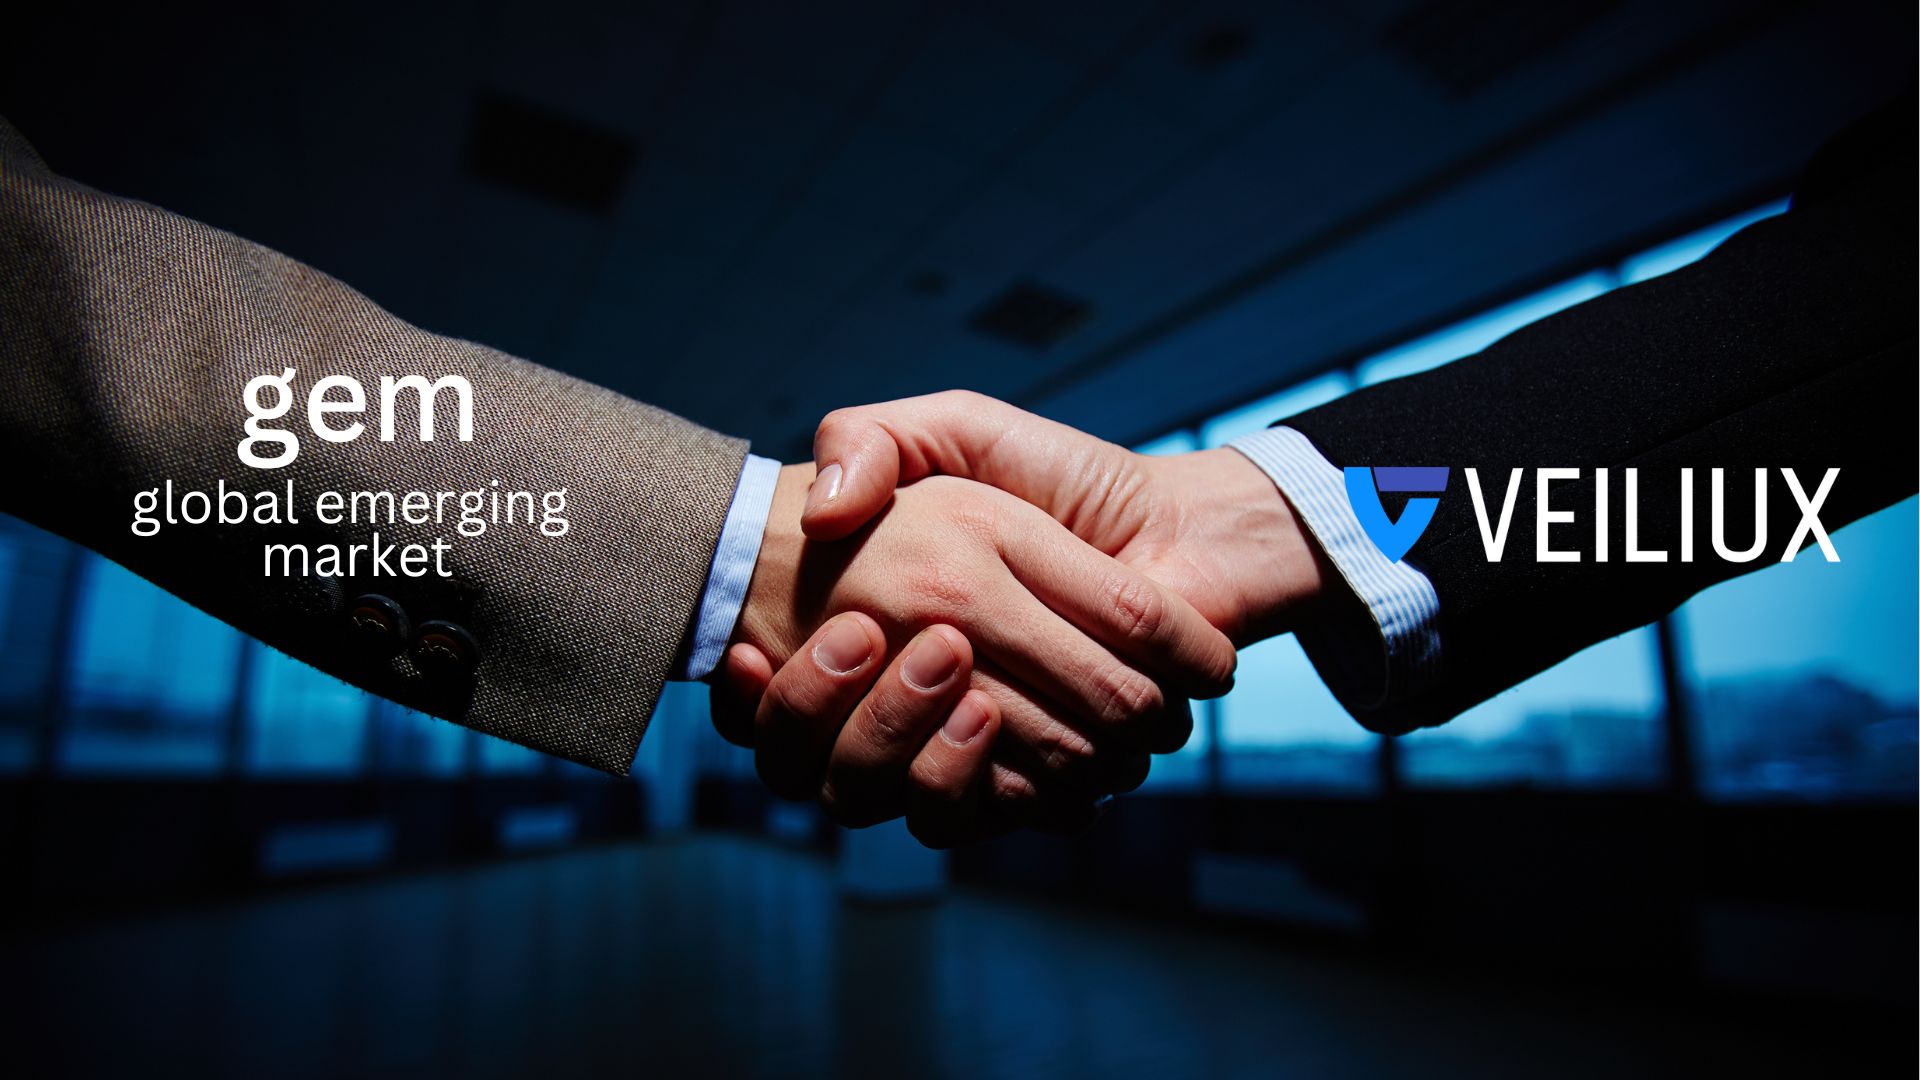 Veiliux to Become The First of It’s Kind Audit Firm to Secure Record-Breaking $30 Million IPO Share Subscription Deal with Global Emerging Markets Investment